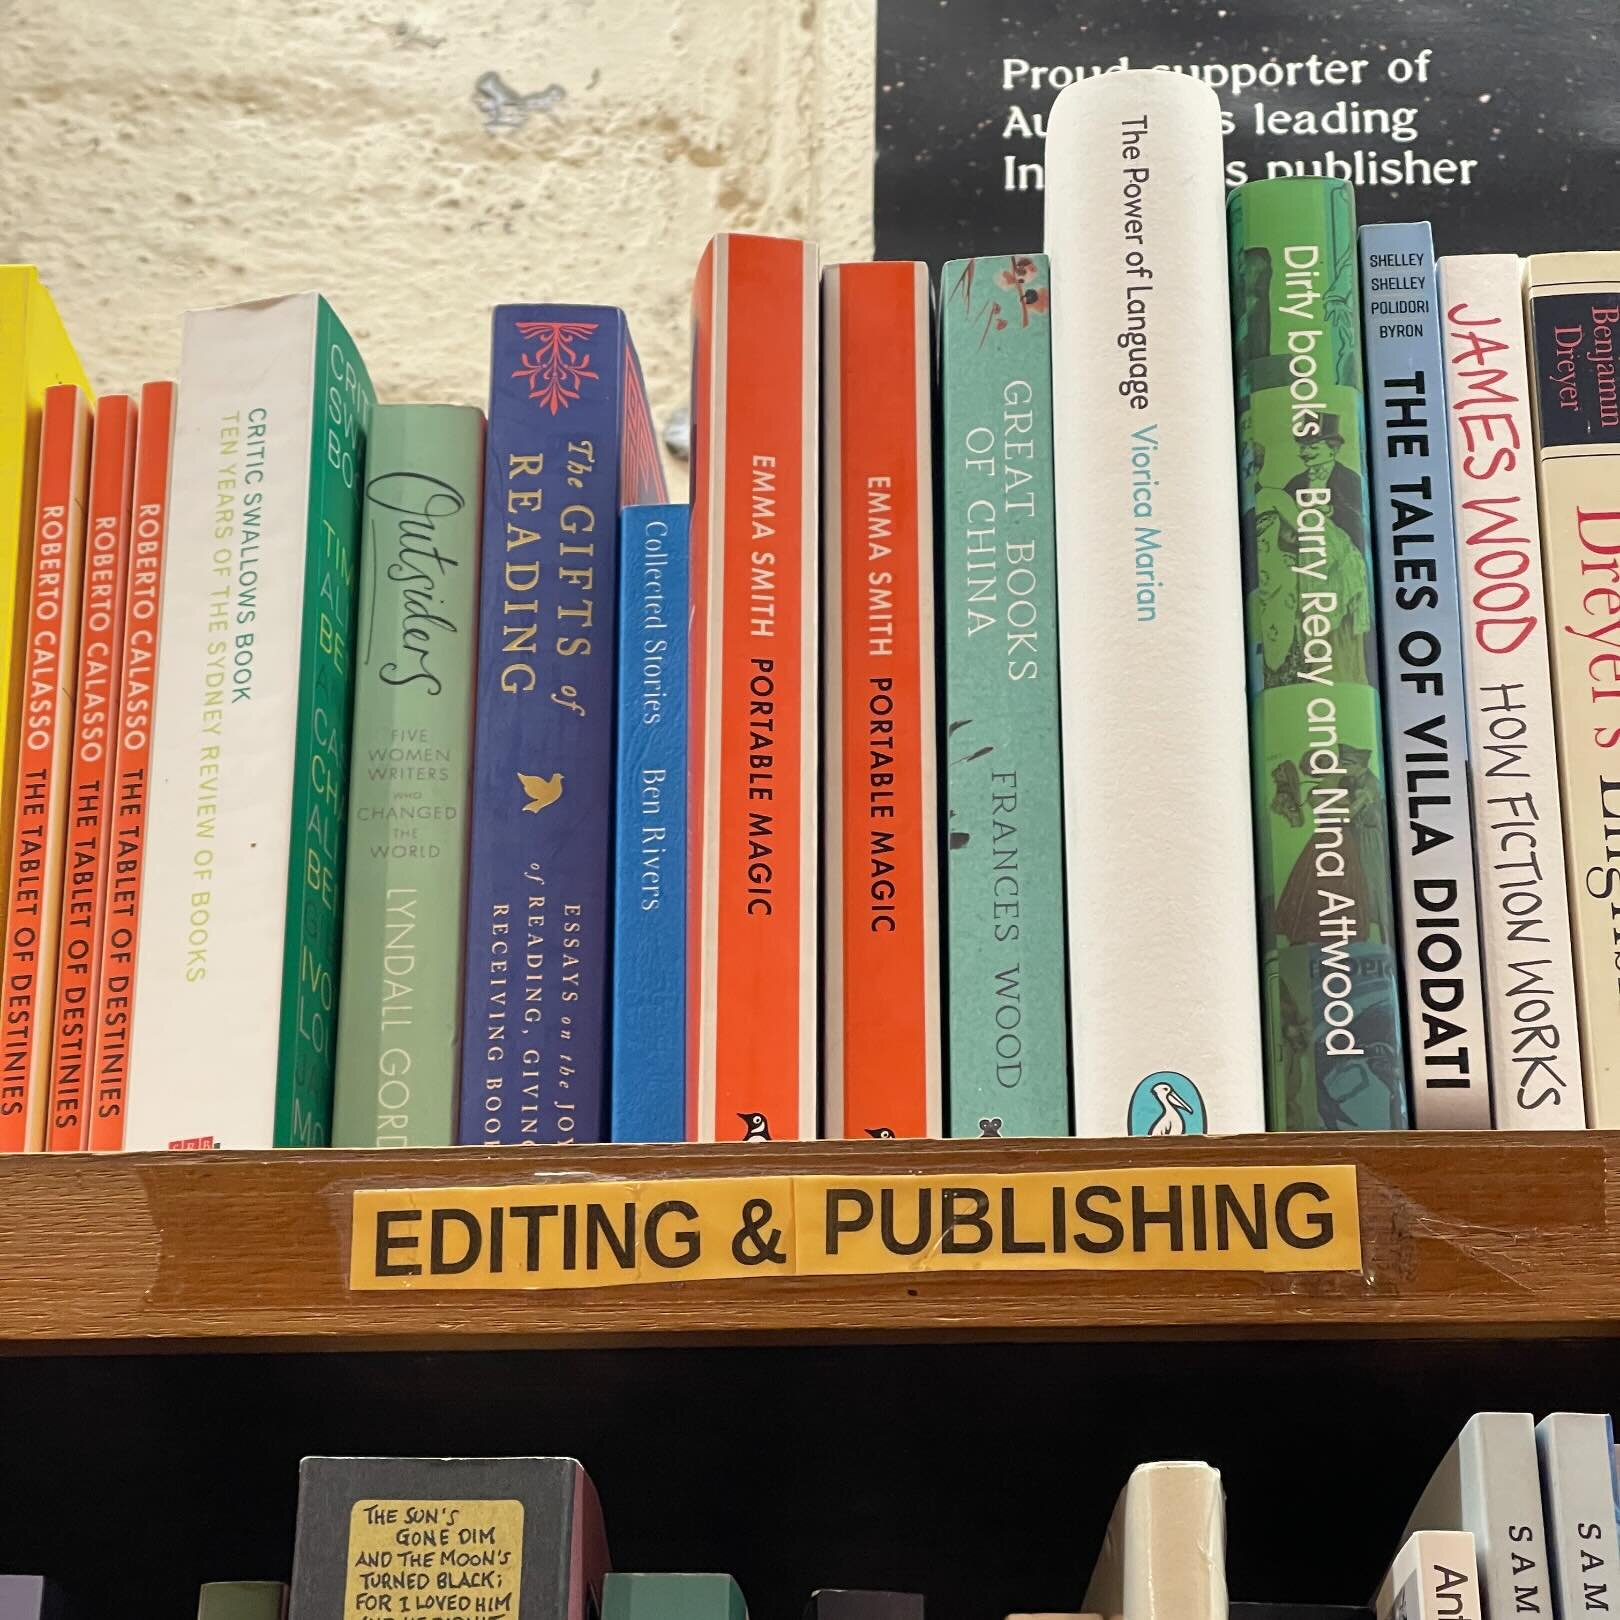 My favourite shelf in any bookstore (although you&rsquo;re not always guaranteed to find one as clearly labelled as this one @thepaperbackbookshop). 

#booksaboutbooks #booksaboutediting #editingbooks #publishing #editing #editor #bookshop #bookshelf